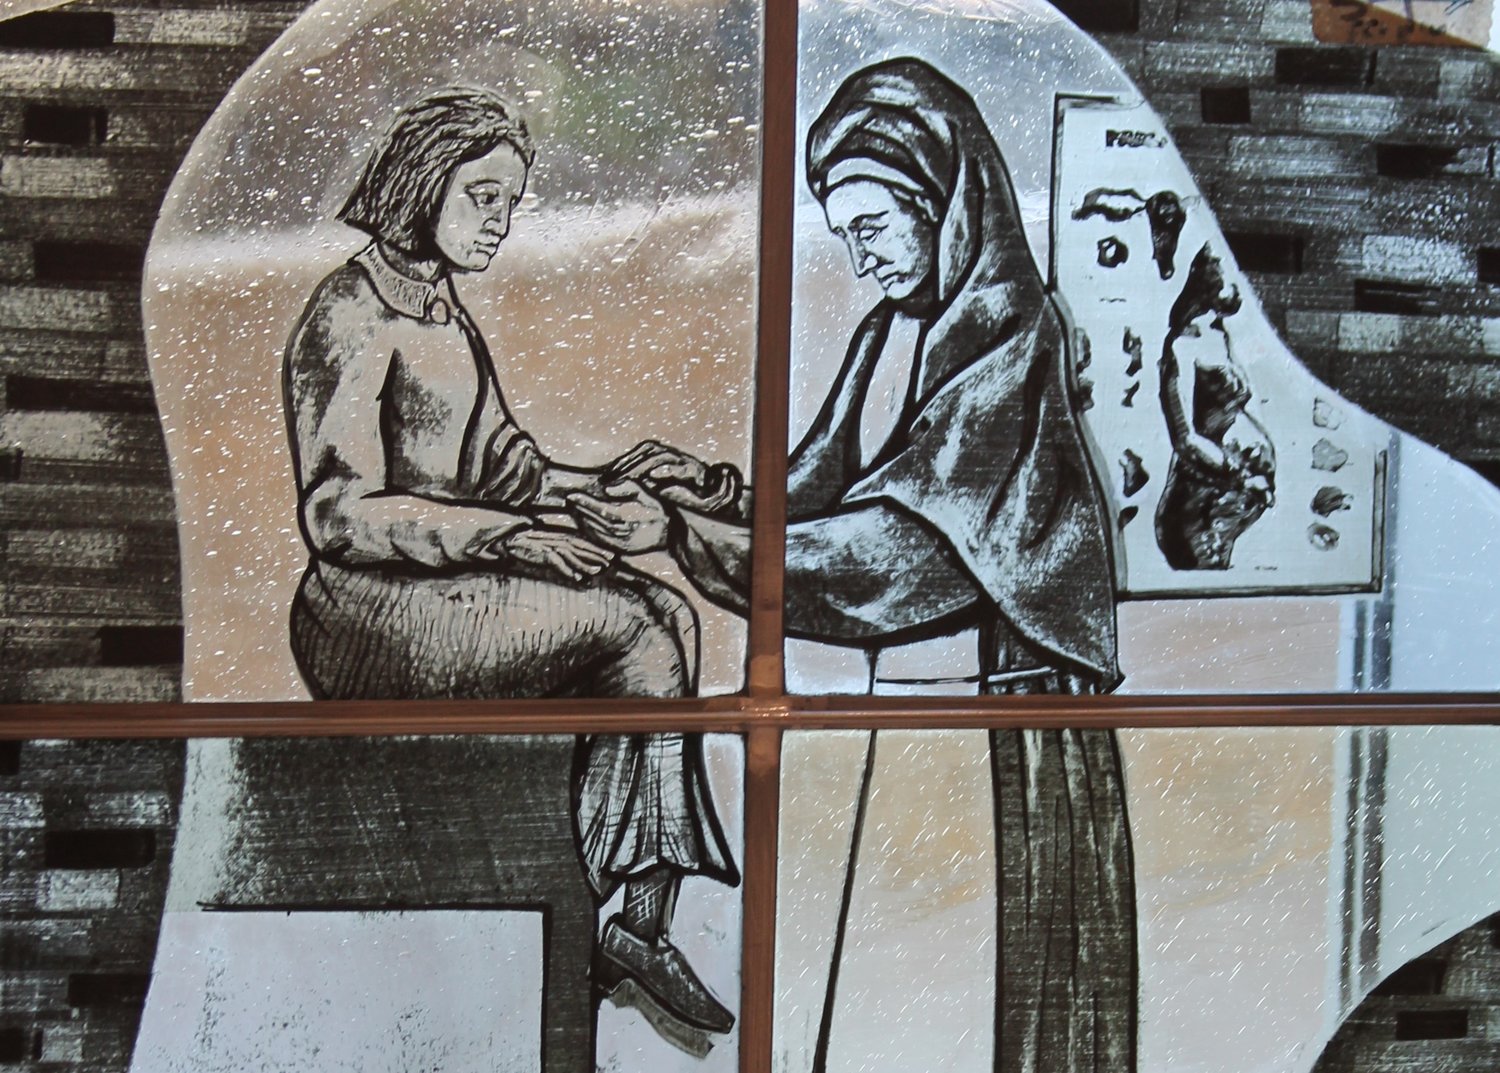 An image in an art glass window in the hospital chapel represents one of the many sisters who founded the hospital and treated patients there for many decades.